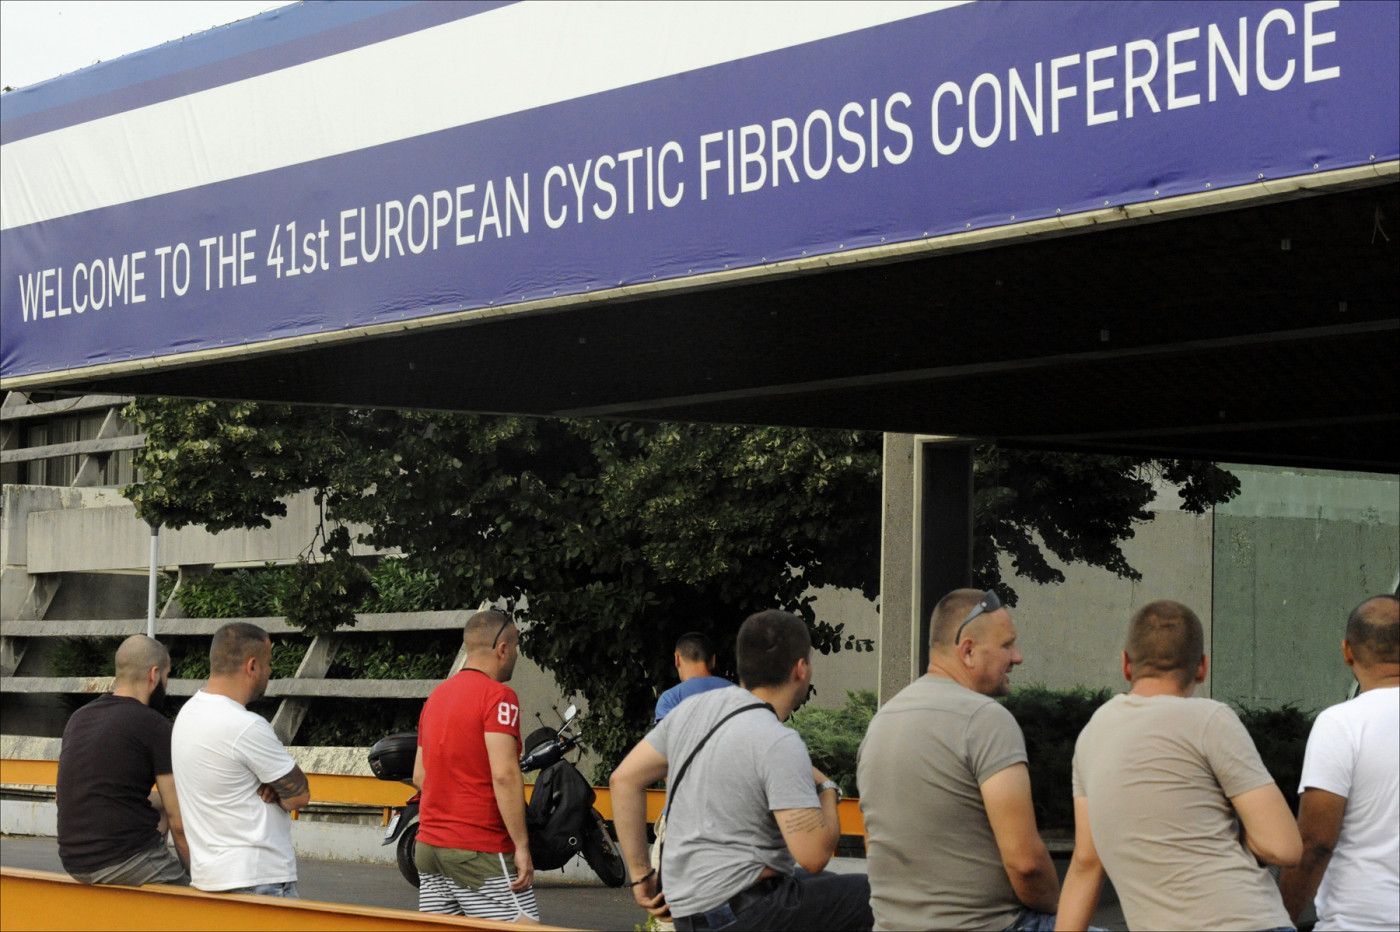 European Cystic Fibrosis Conference